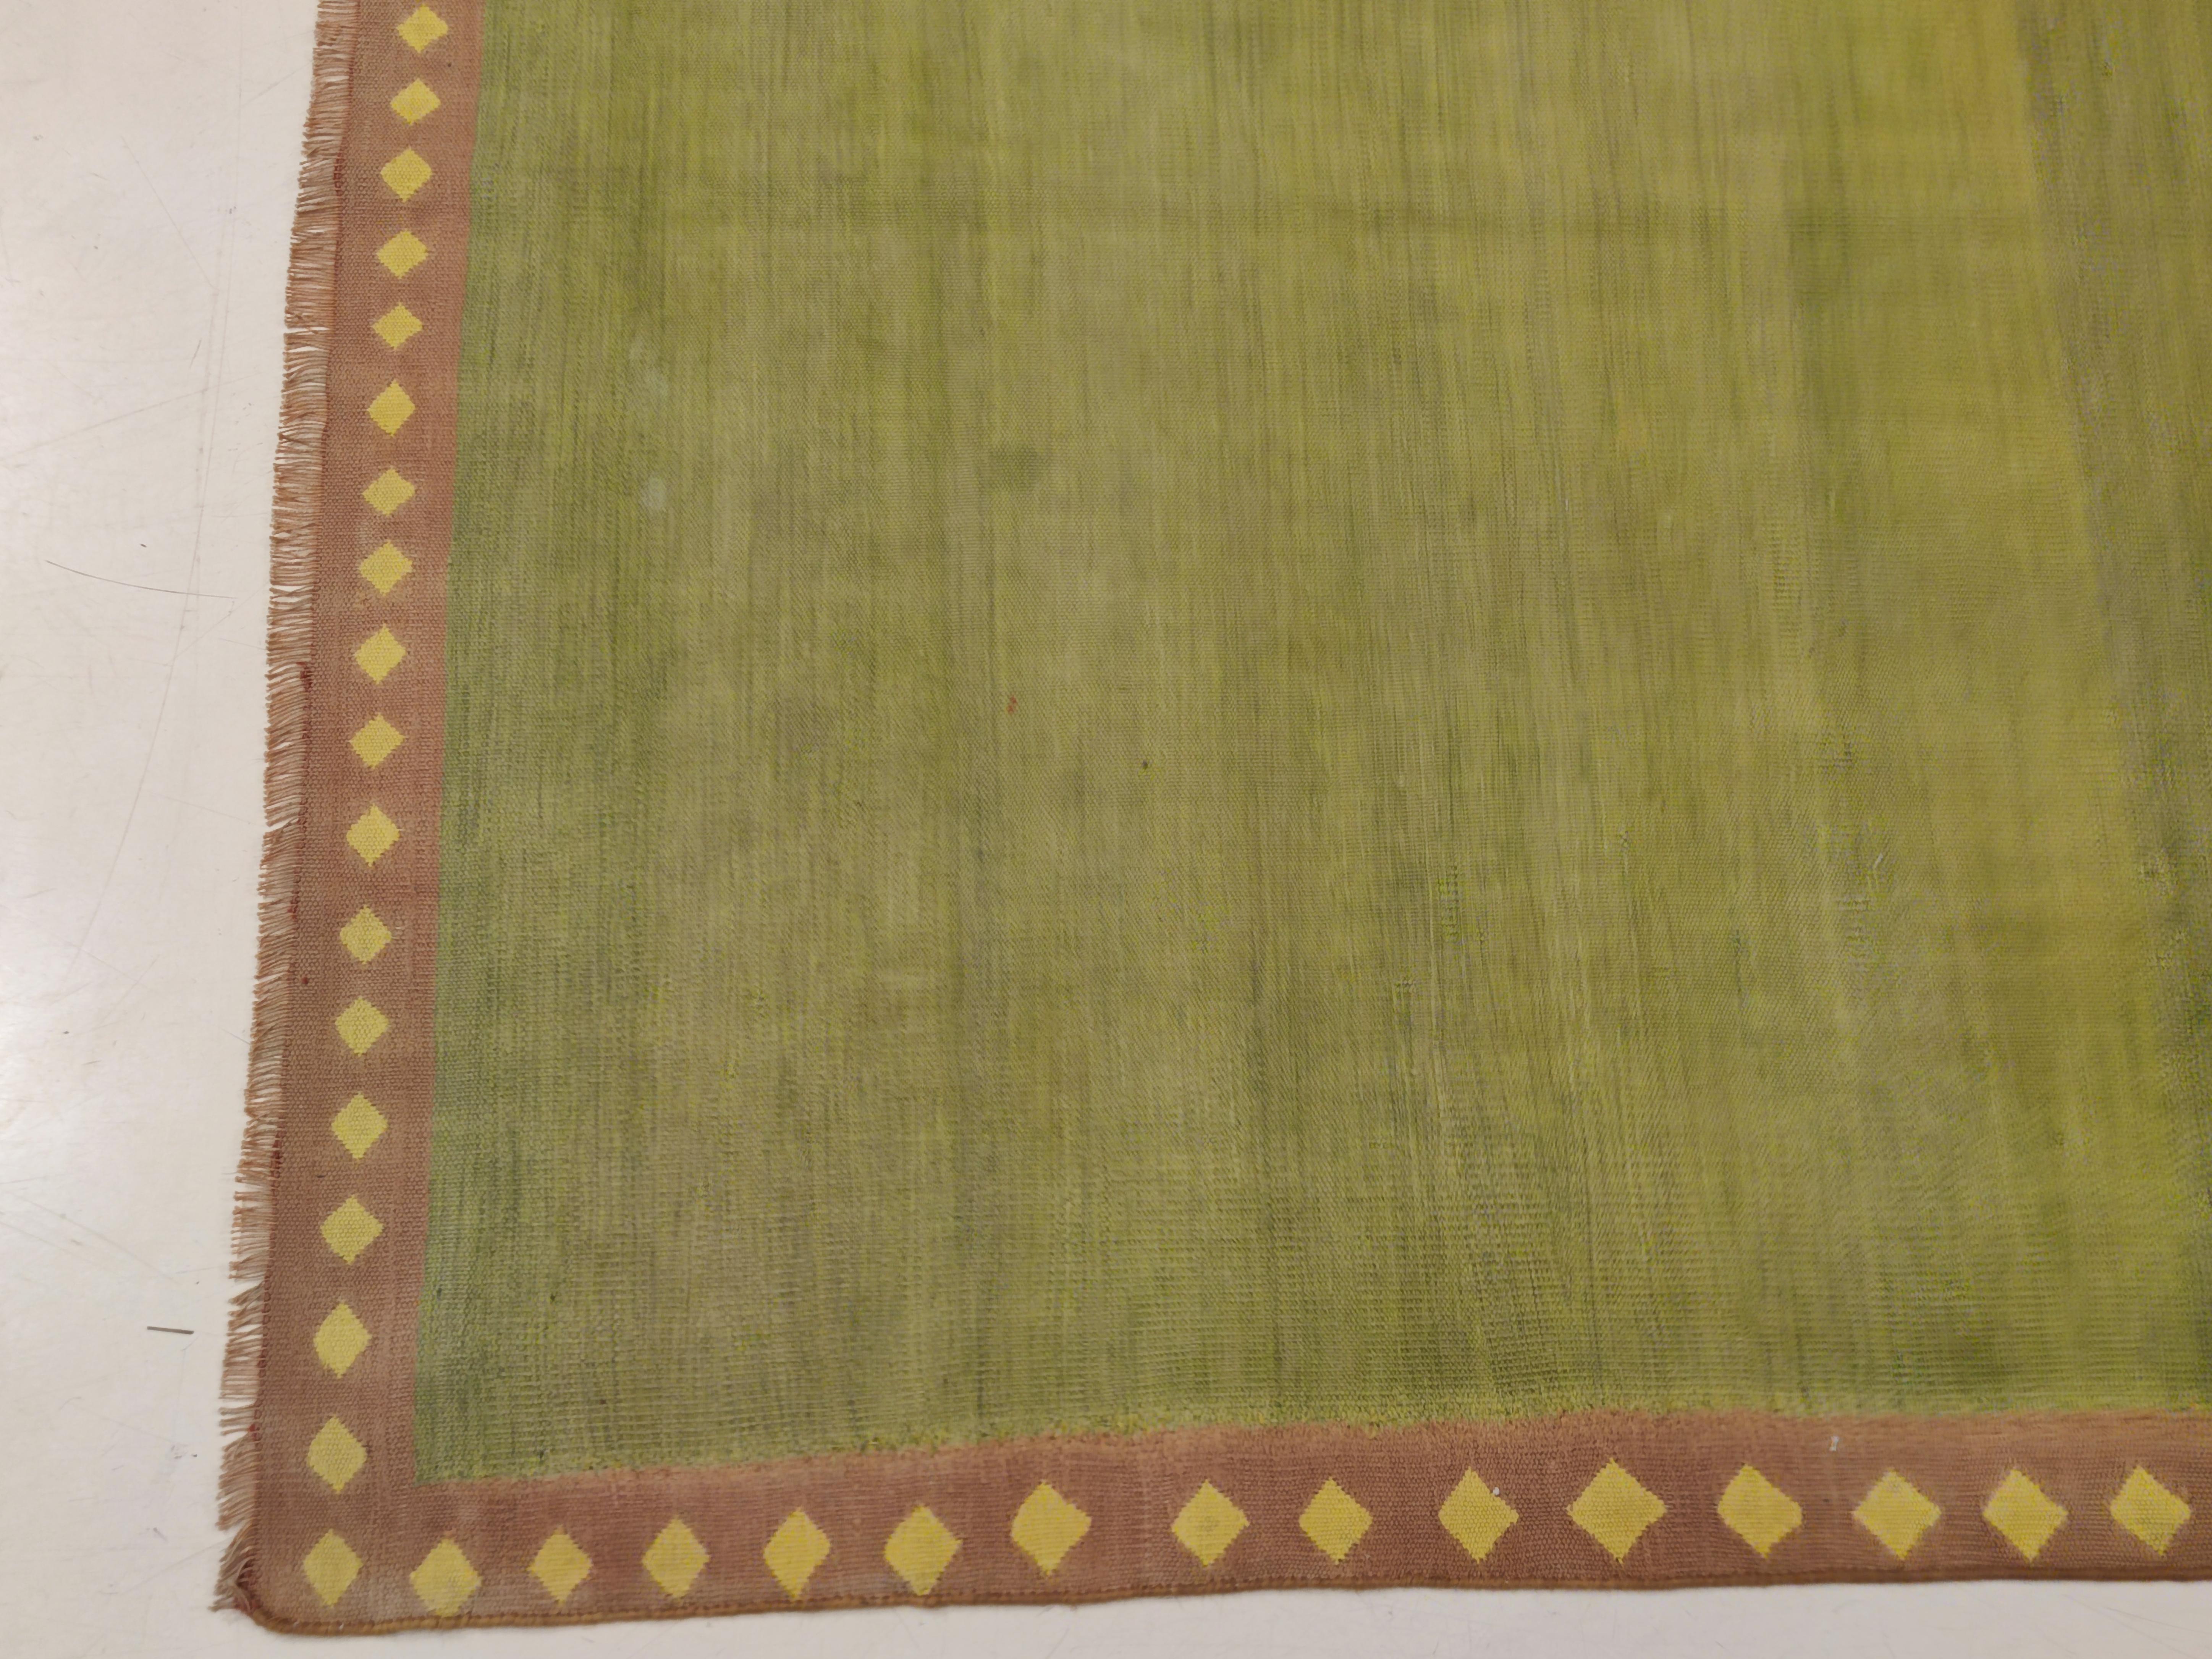 Hand-Woven Antique Minimalist Indian Cotton Dhurrie in Chartreuse Green